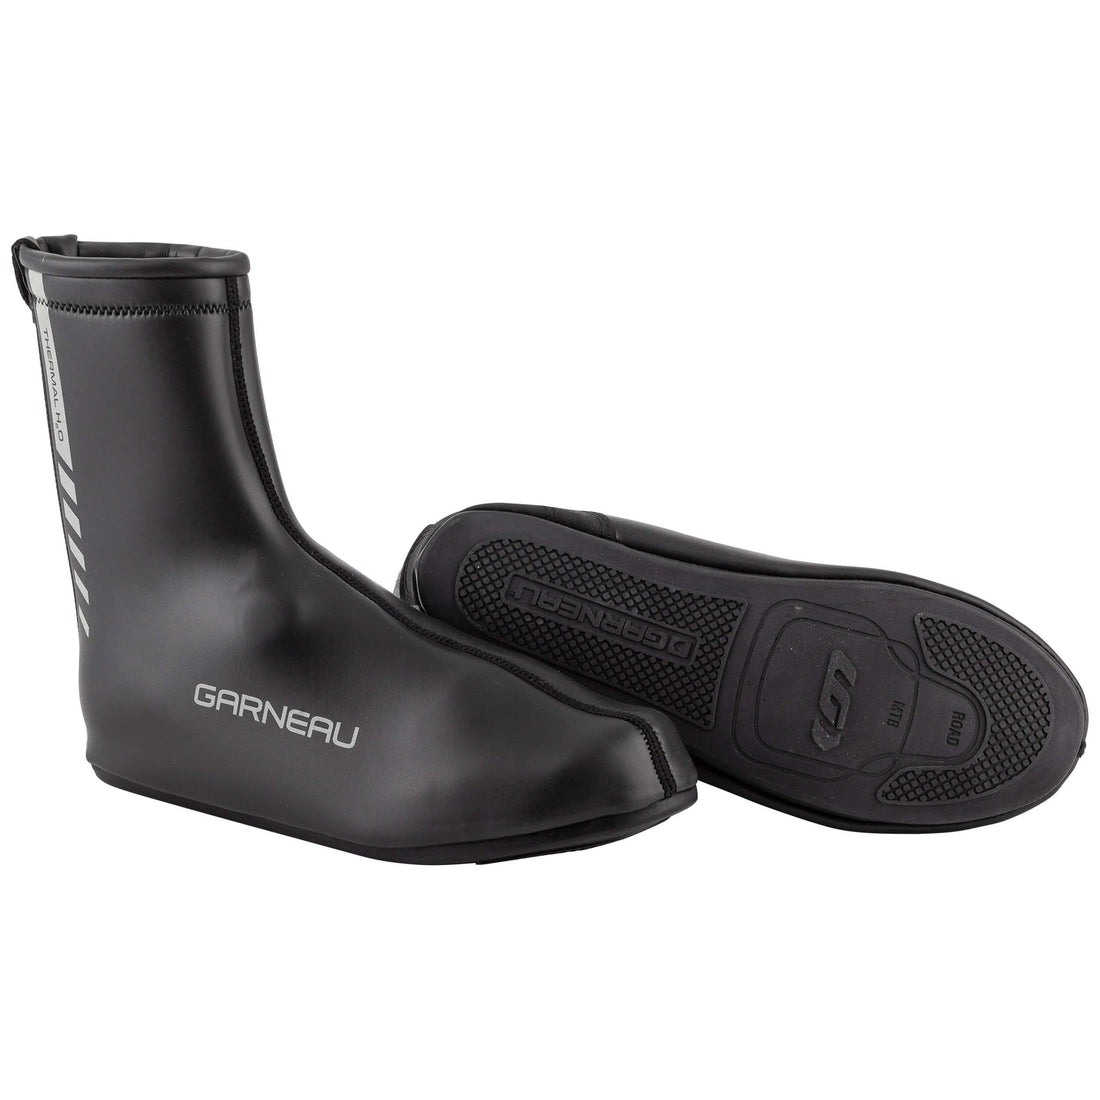 Garneau Couvre-chaussures cyclistes Thermal H2O (5709879902365)